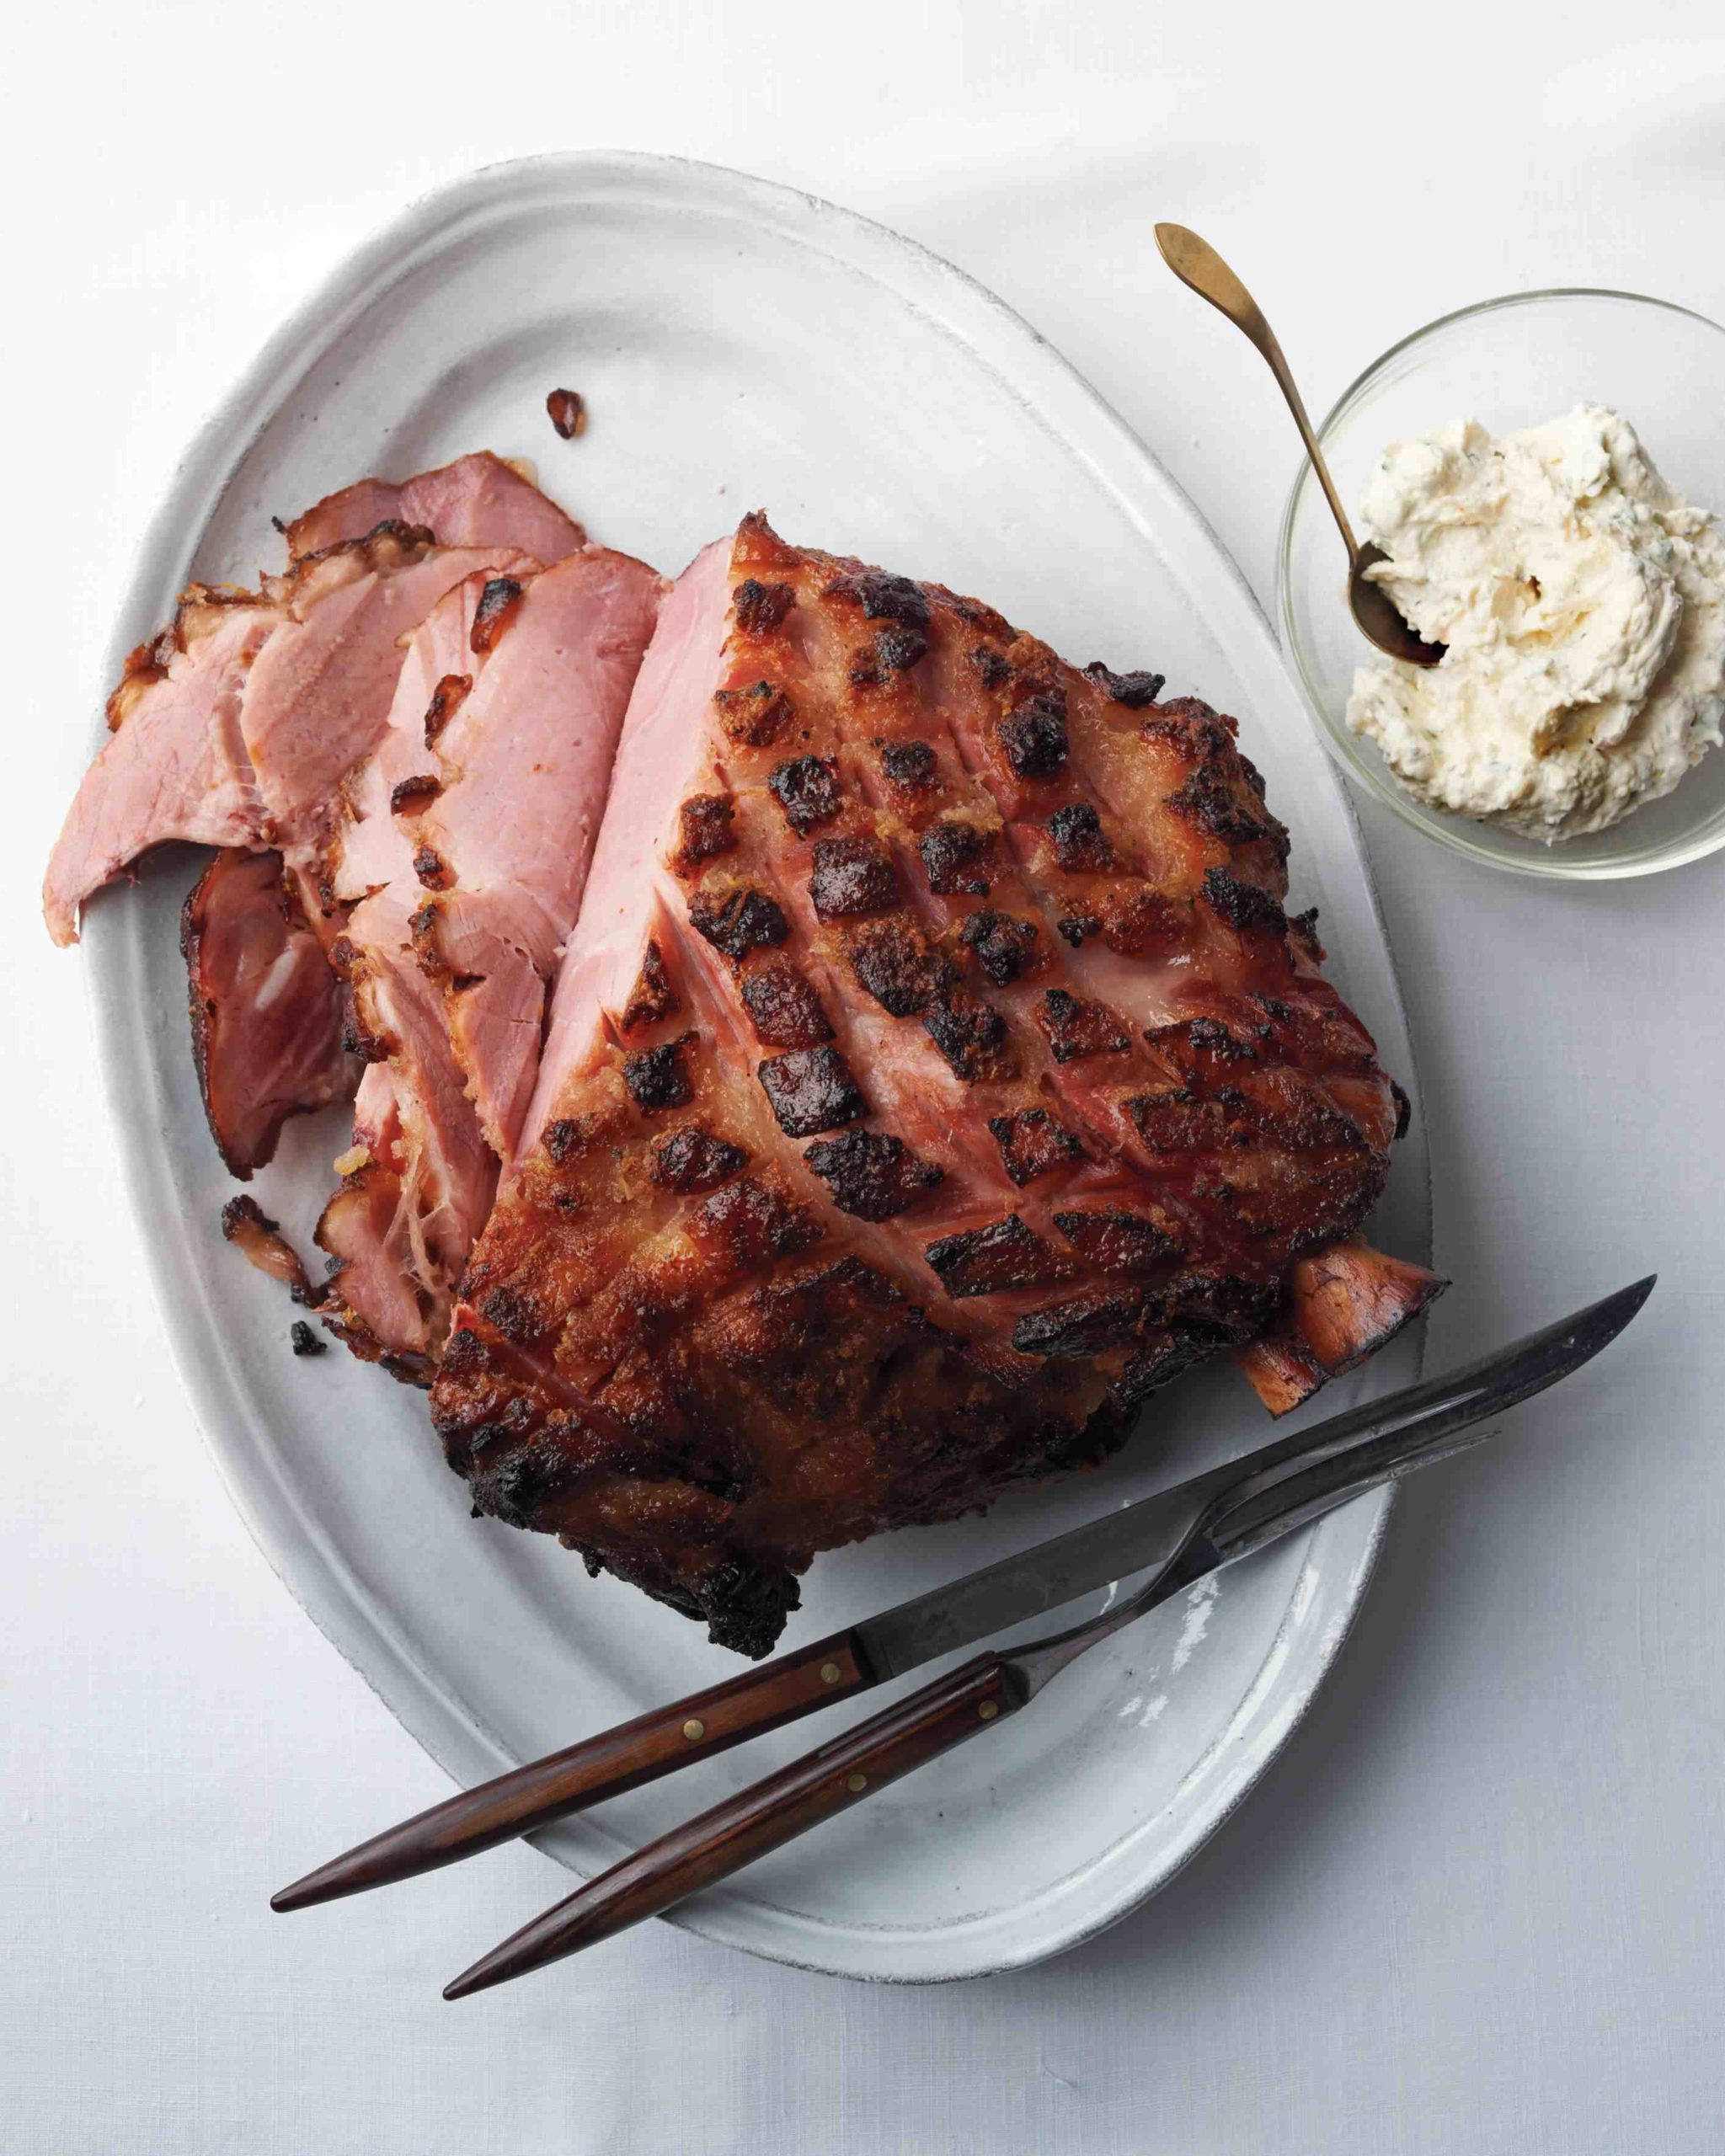 What is the best ham for Thanksgiving?